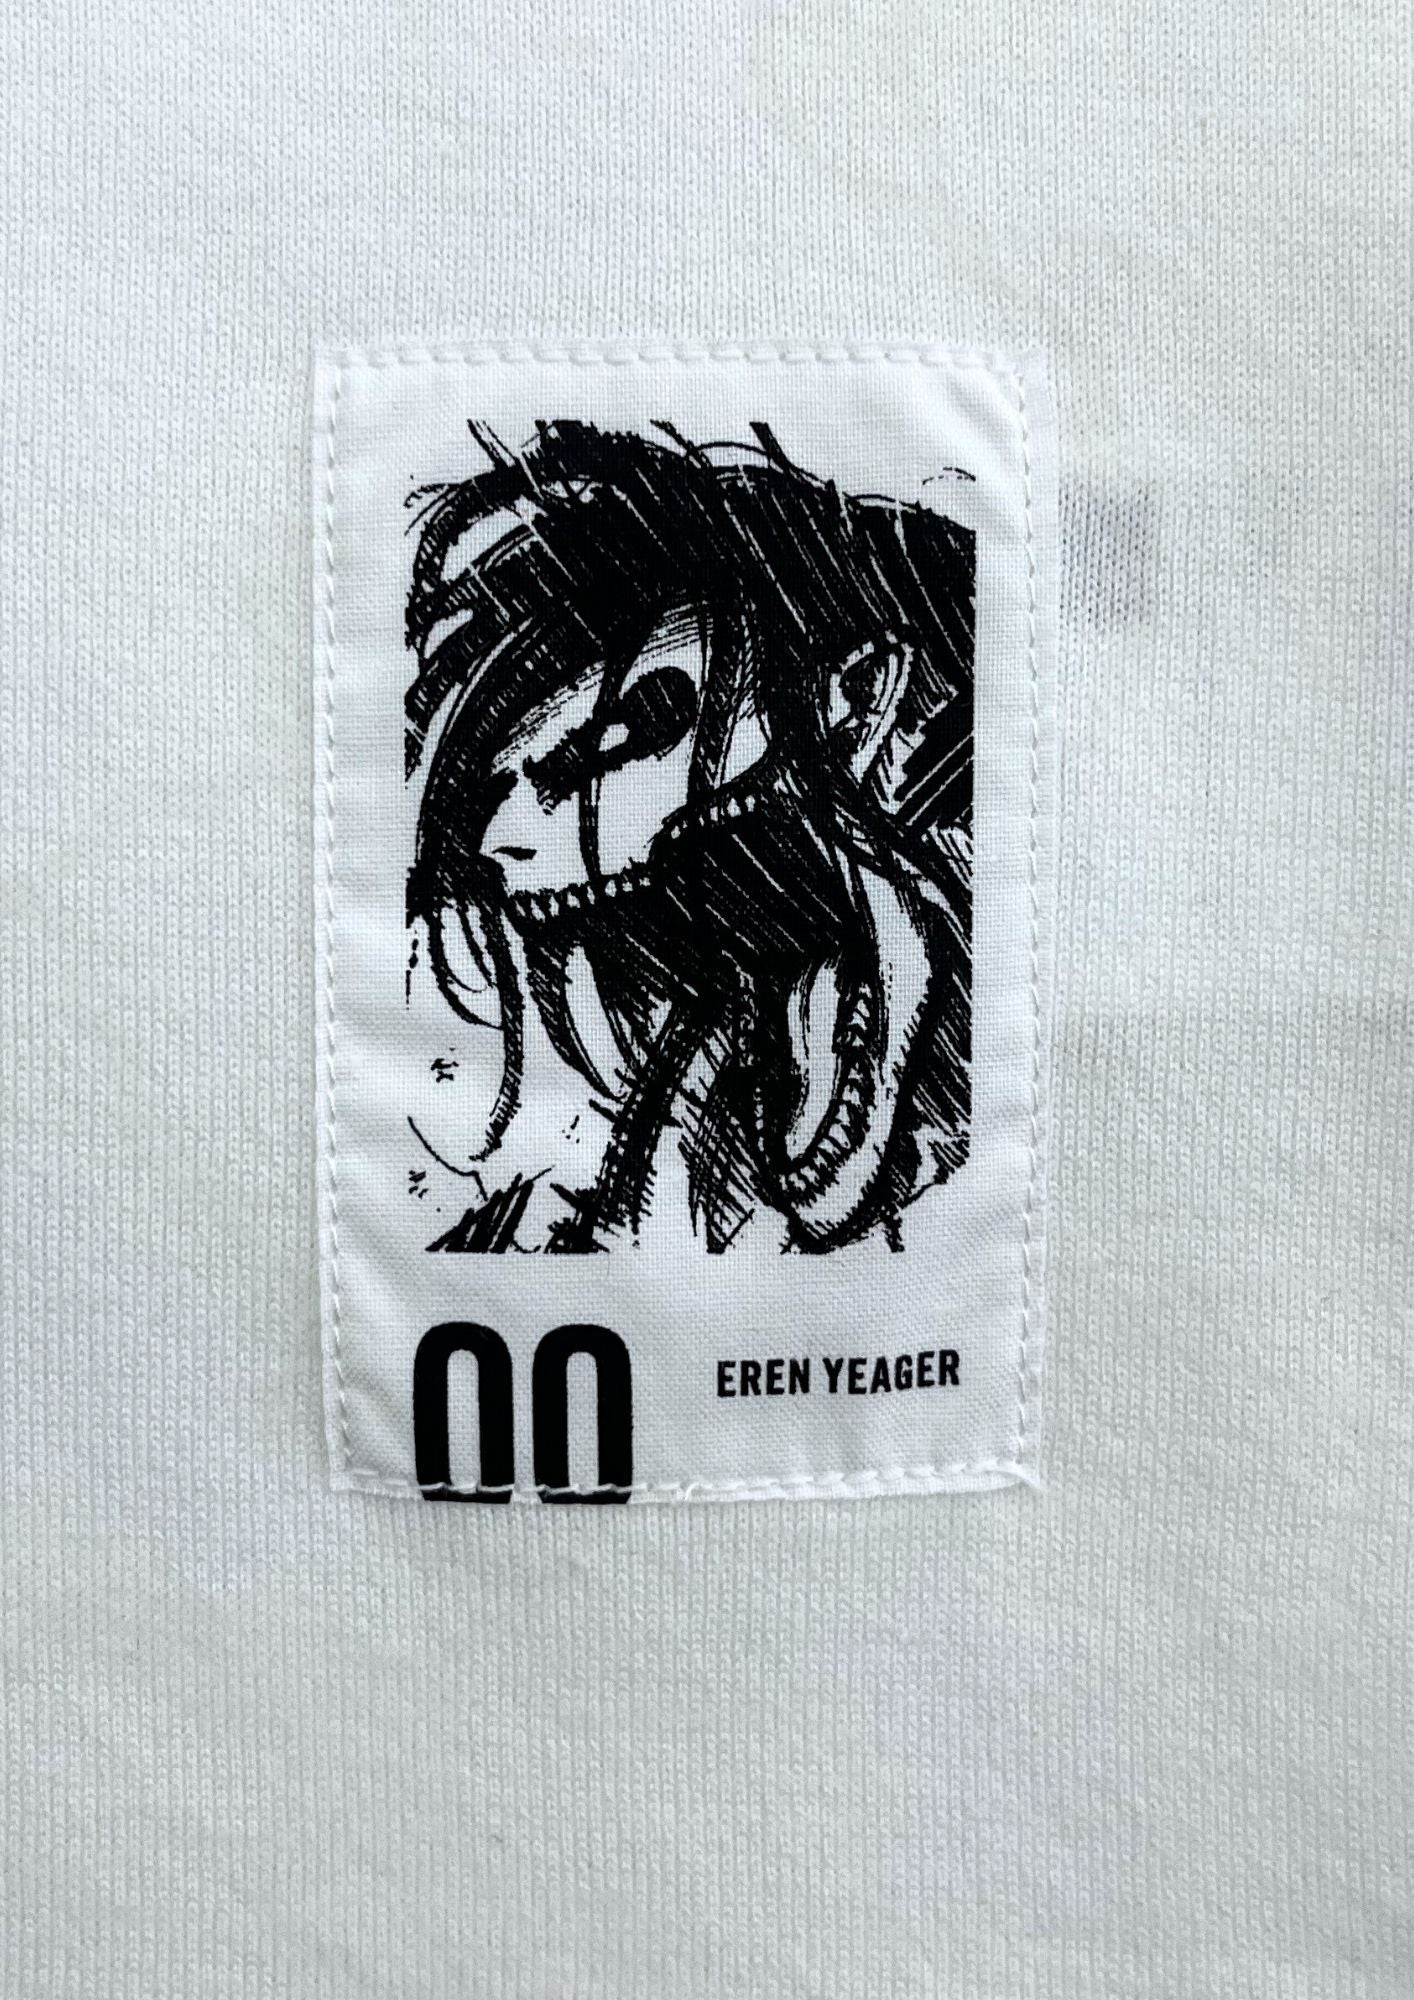 2015 Attack on Titan x ANREALGE Erin Yeager 00 UV Print Changing Colour T-shirt